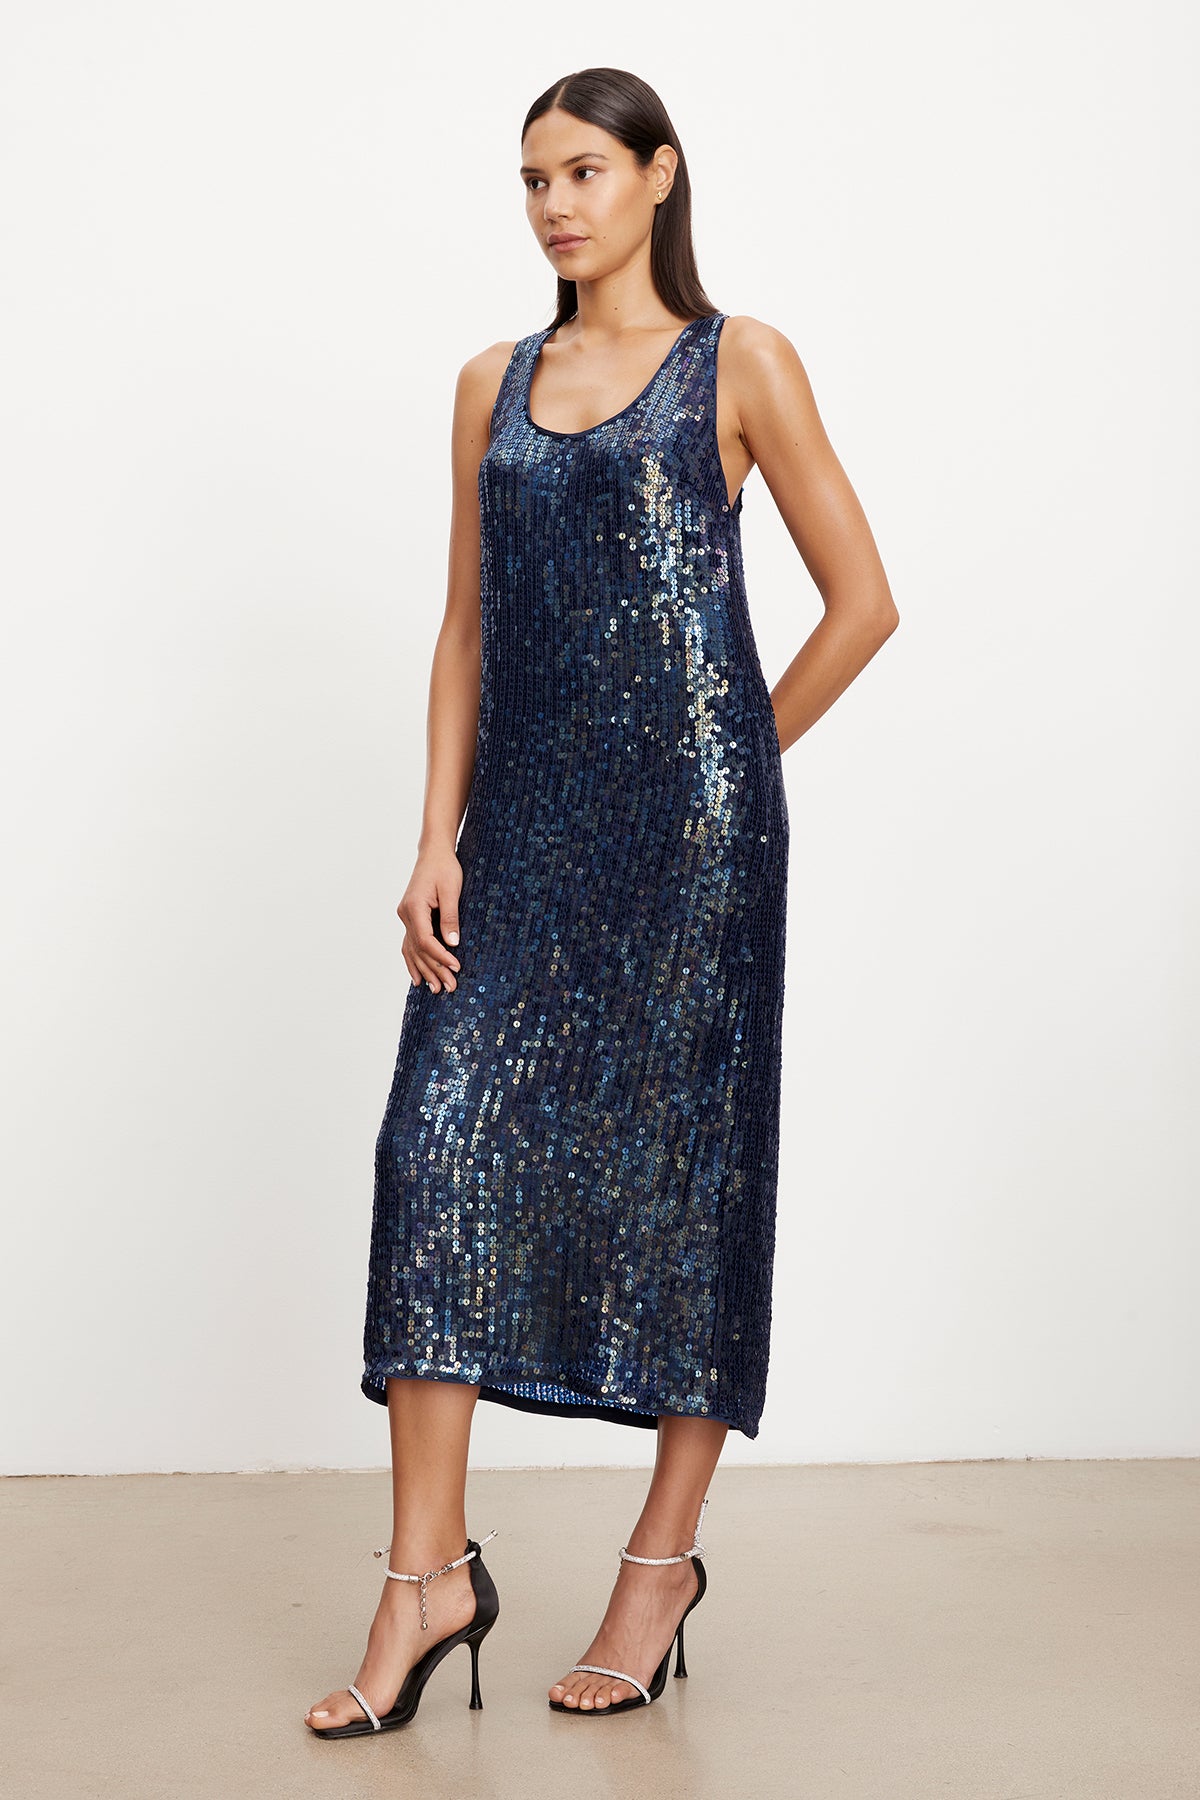 The elegance of the ALENA SEQUIN TANK DRESS shines through as the model confidently showcases her wardrobe in a stunning blue sequin midi dress by Velvet by Graham & Spencer.-35577745440961